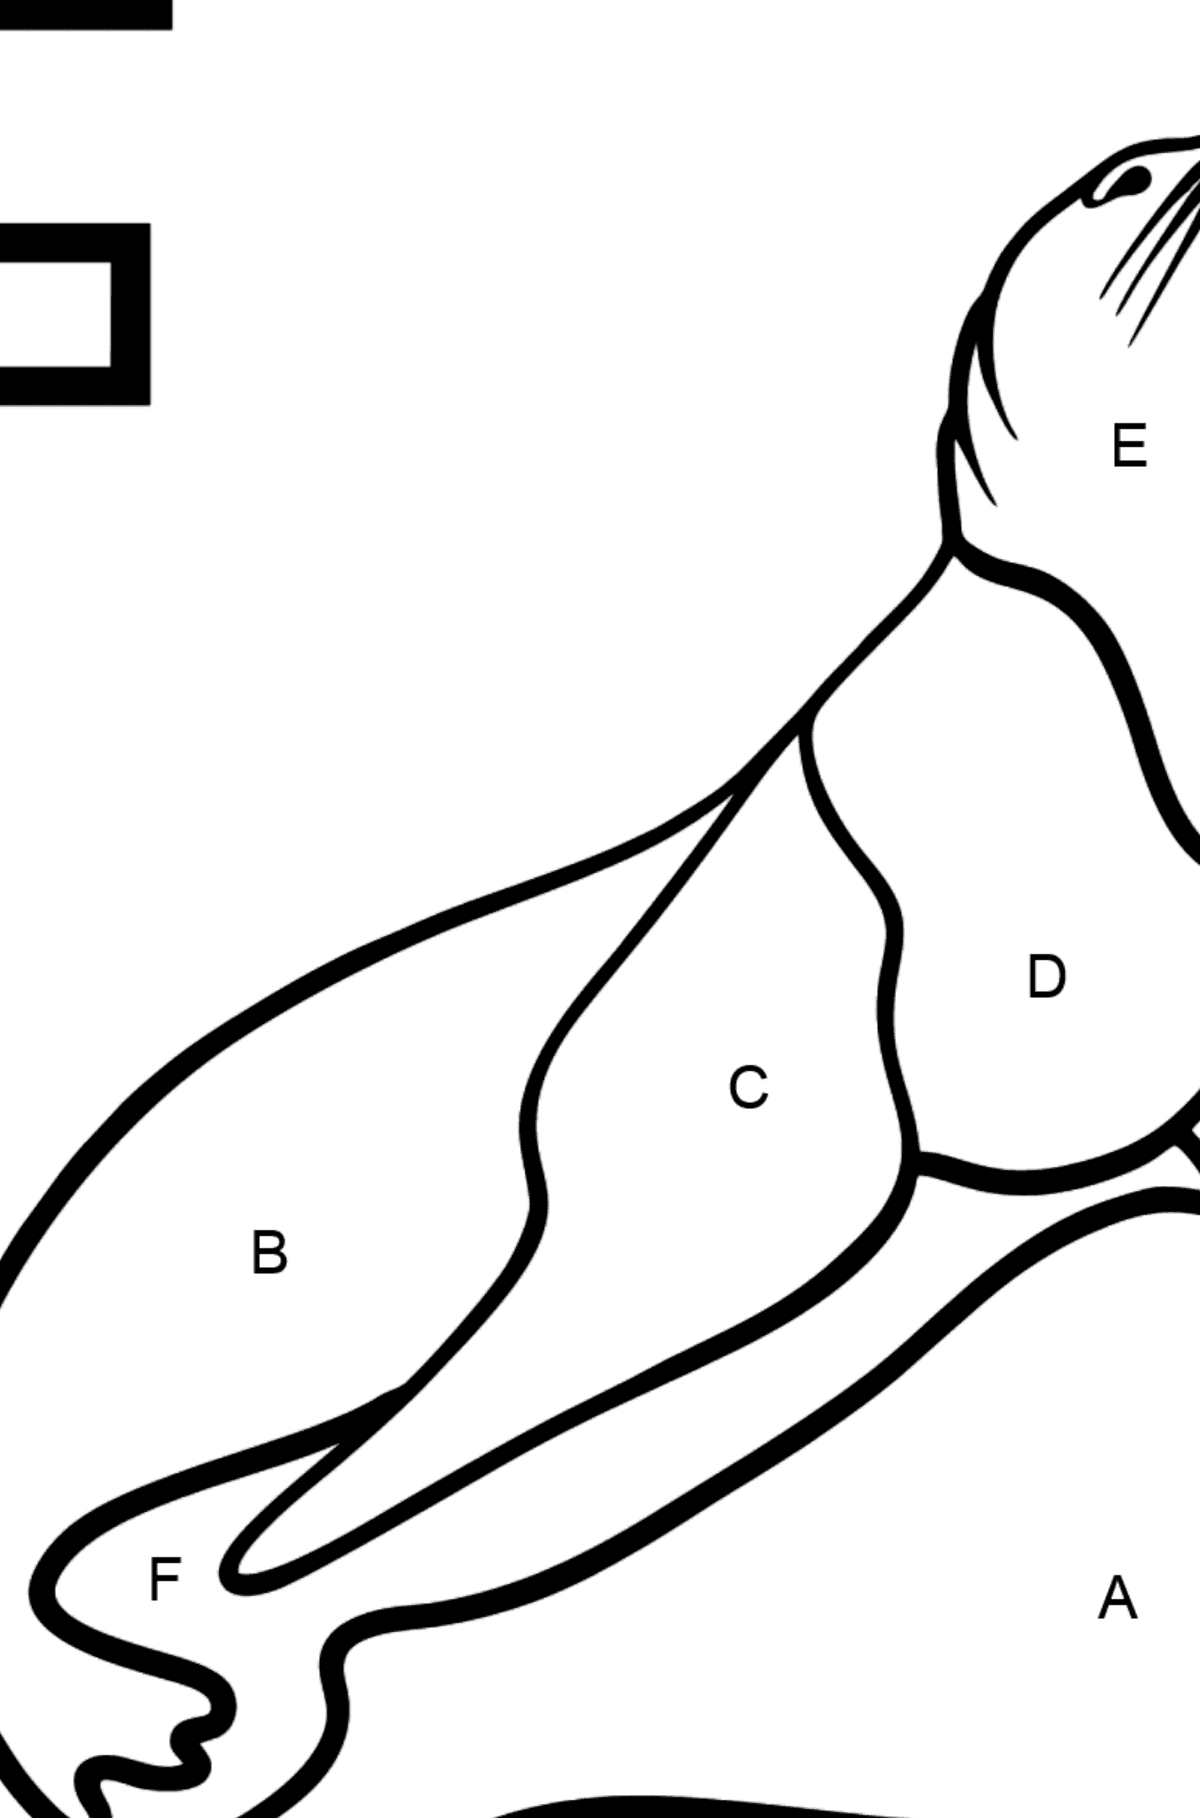 Spanish Letter F coloring pages - FOCA - Coloring by Letters for Kids